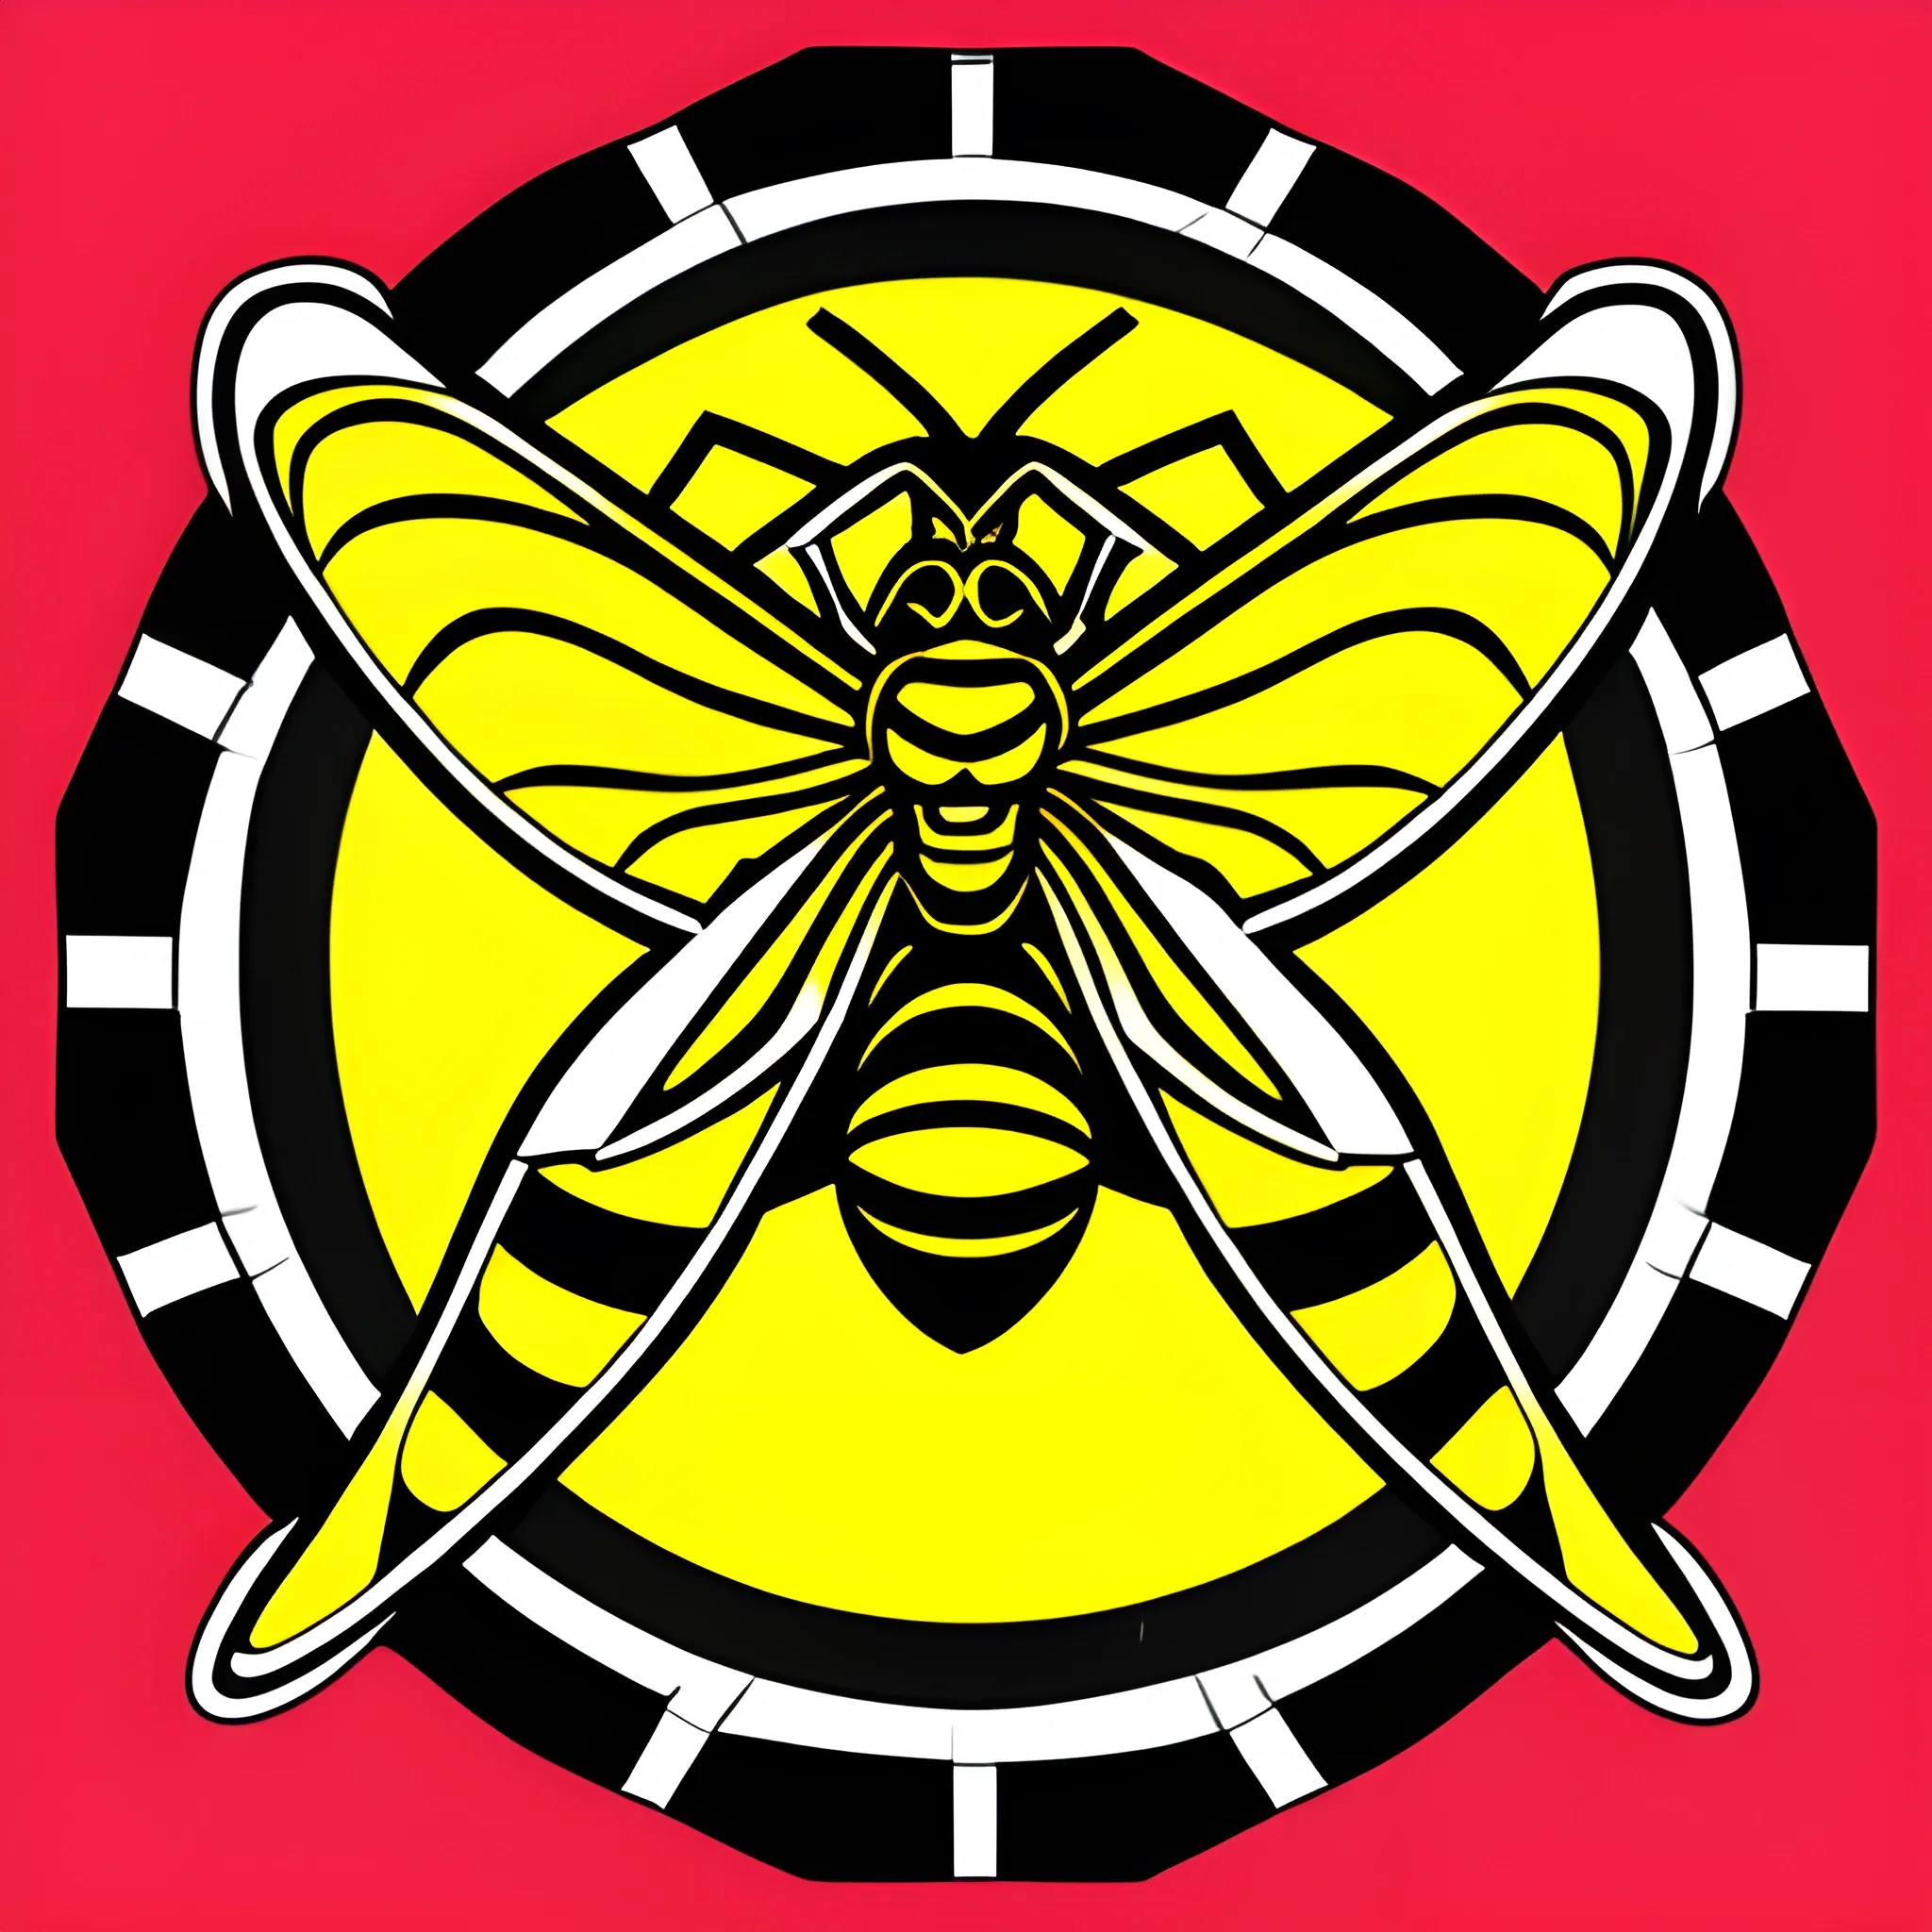 , Trippy 
a sports shield that contains the word basket calasparra, a wasp with a basketball. wear black, yellow and white colors